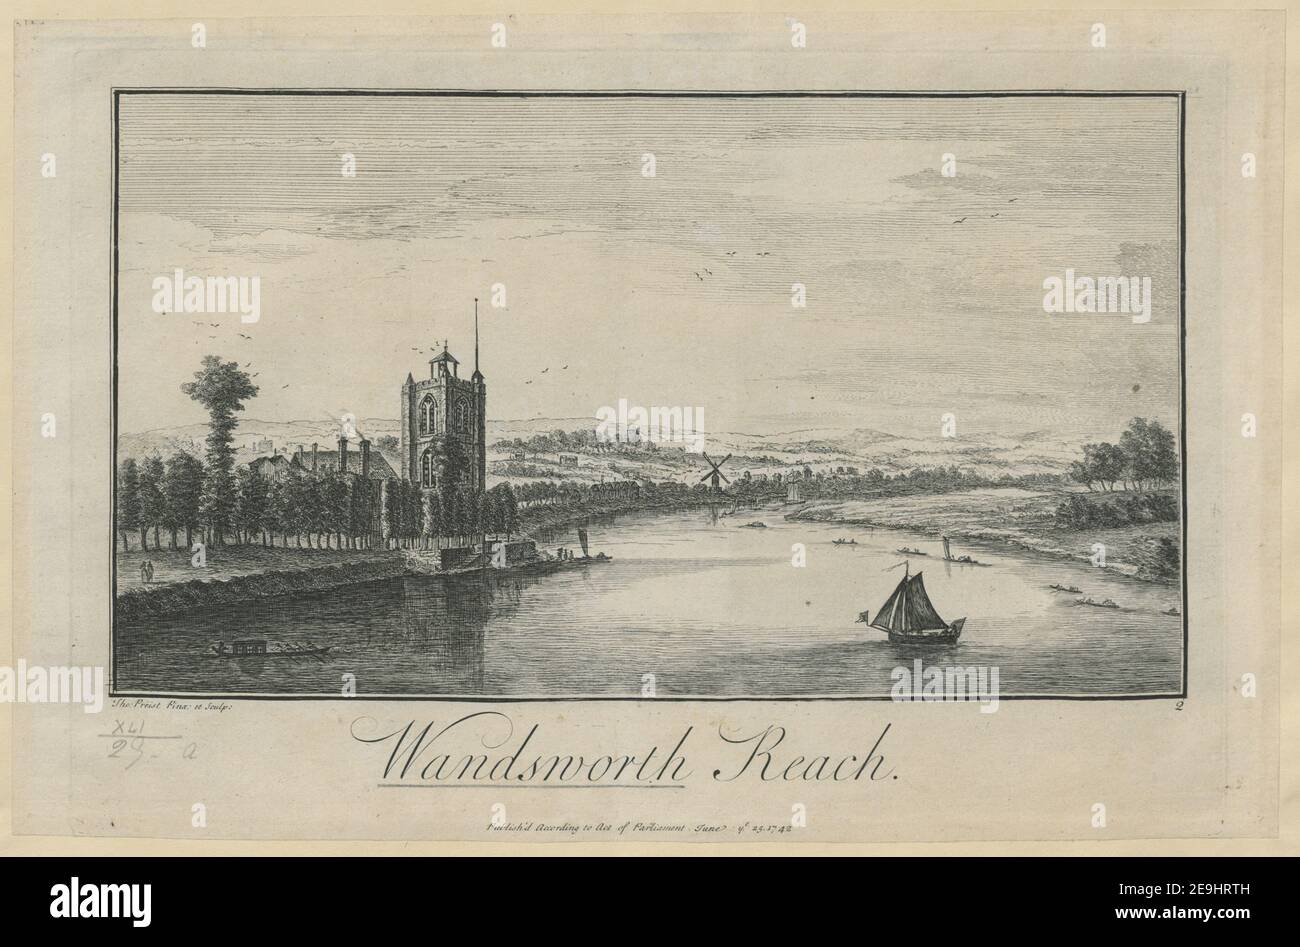 Wandsworth Reach.  Author  Preist, Thomas 41.29.a. Place of publication: [London] Publisher: Publish'd According to Act of Parliament June ye. 25., Date of publication: 1742.  Item type: 1 print Medium: engraving and etching Dimensions: platemark 25.4 x 37.5 cm.  Former owner: George III, King of Great Britain, 1738-1820 Stock Photo